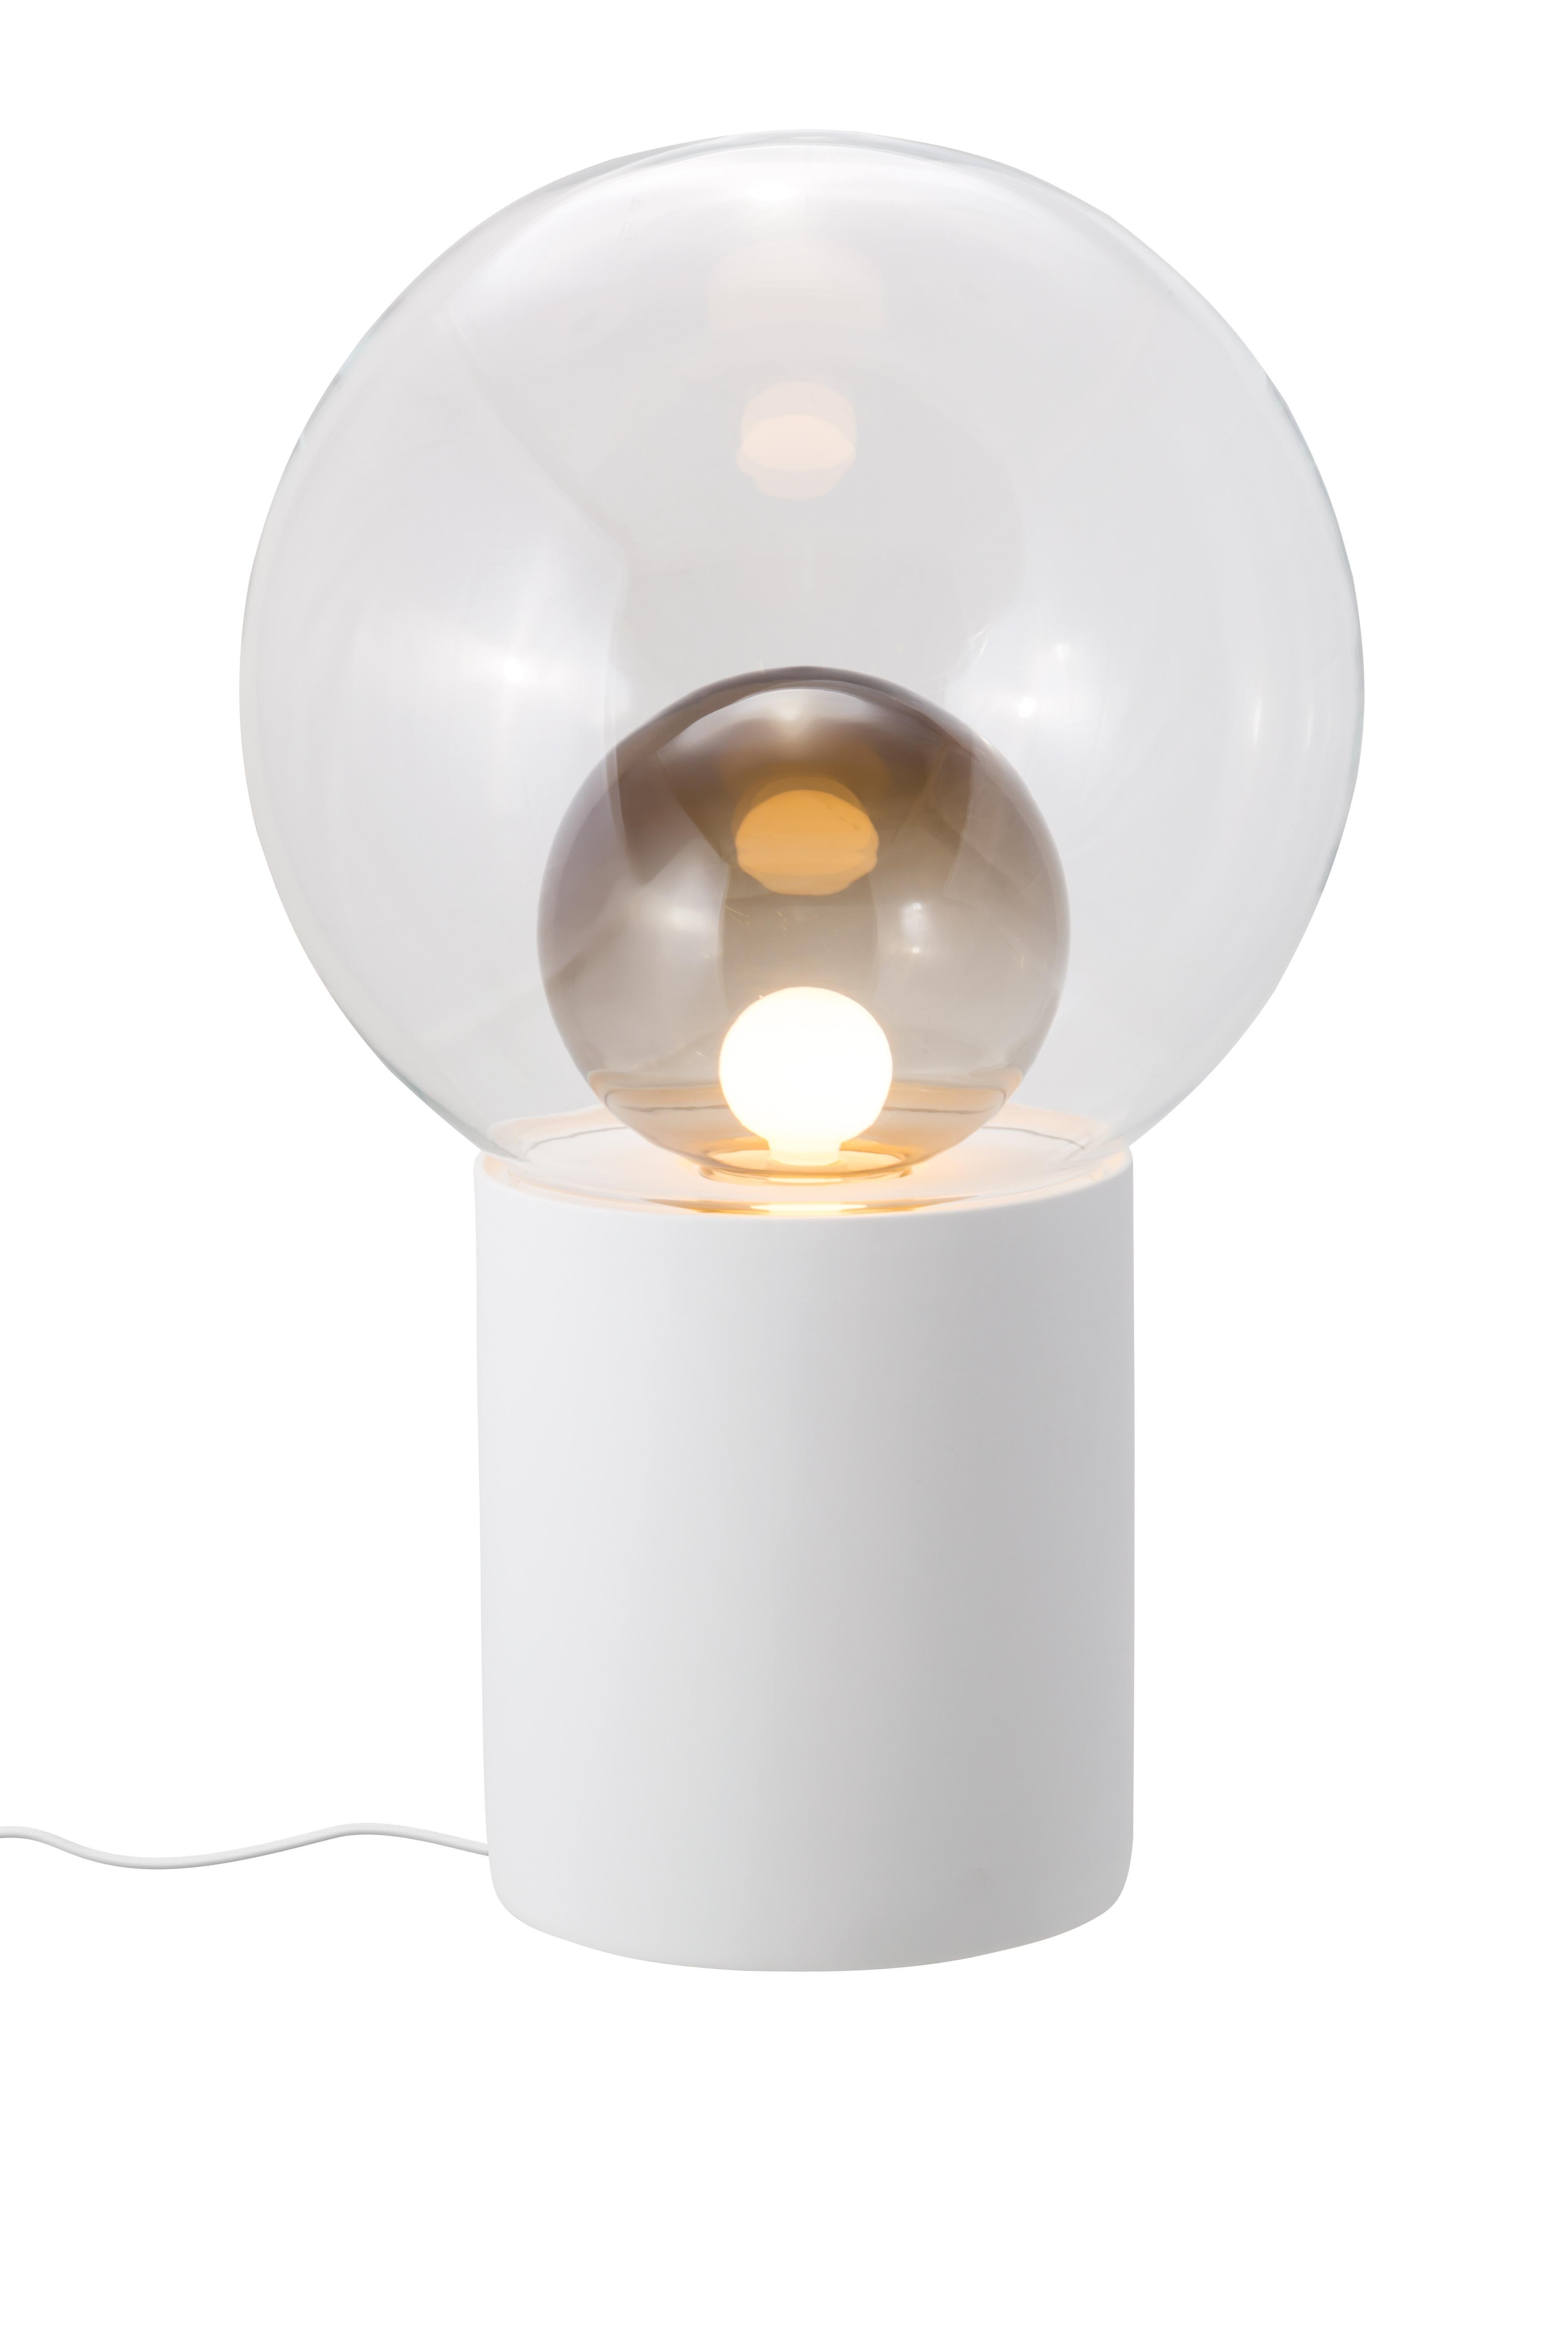 Boule high transparent smoky grey white floor lamp by Pulpo
Dimensions: D52 x H82.5cm
Materials: ceramic, handblown glass, coloured, textile.

Also available in different finishes: transparent opal white black, transparent smoky grey black,